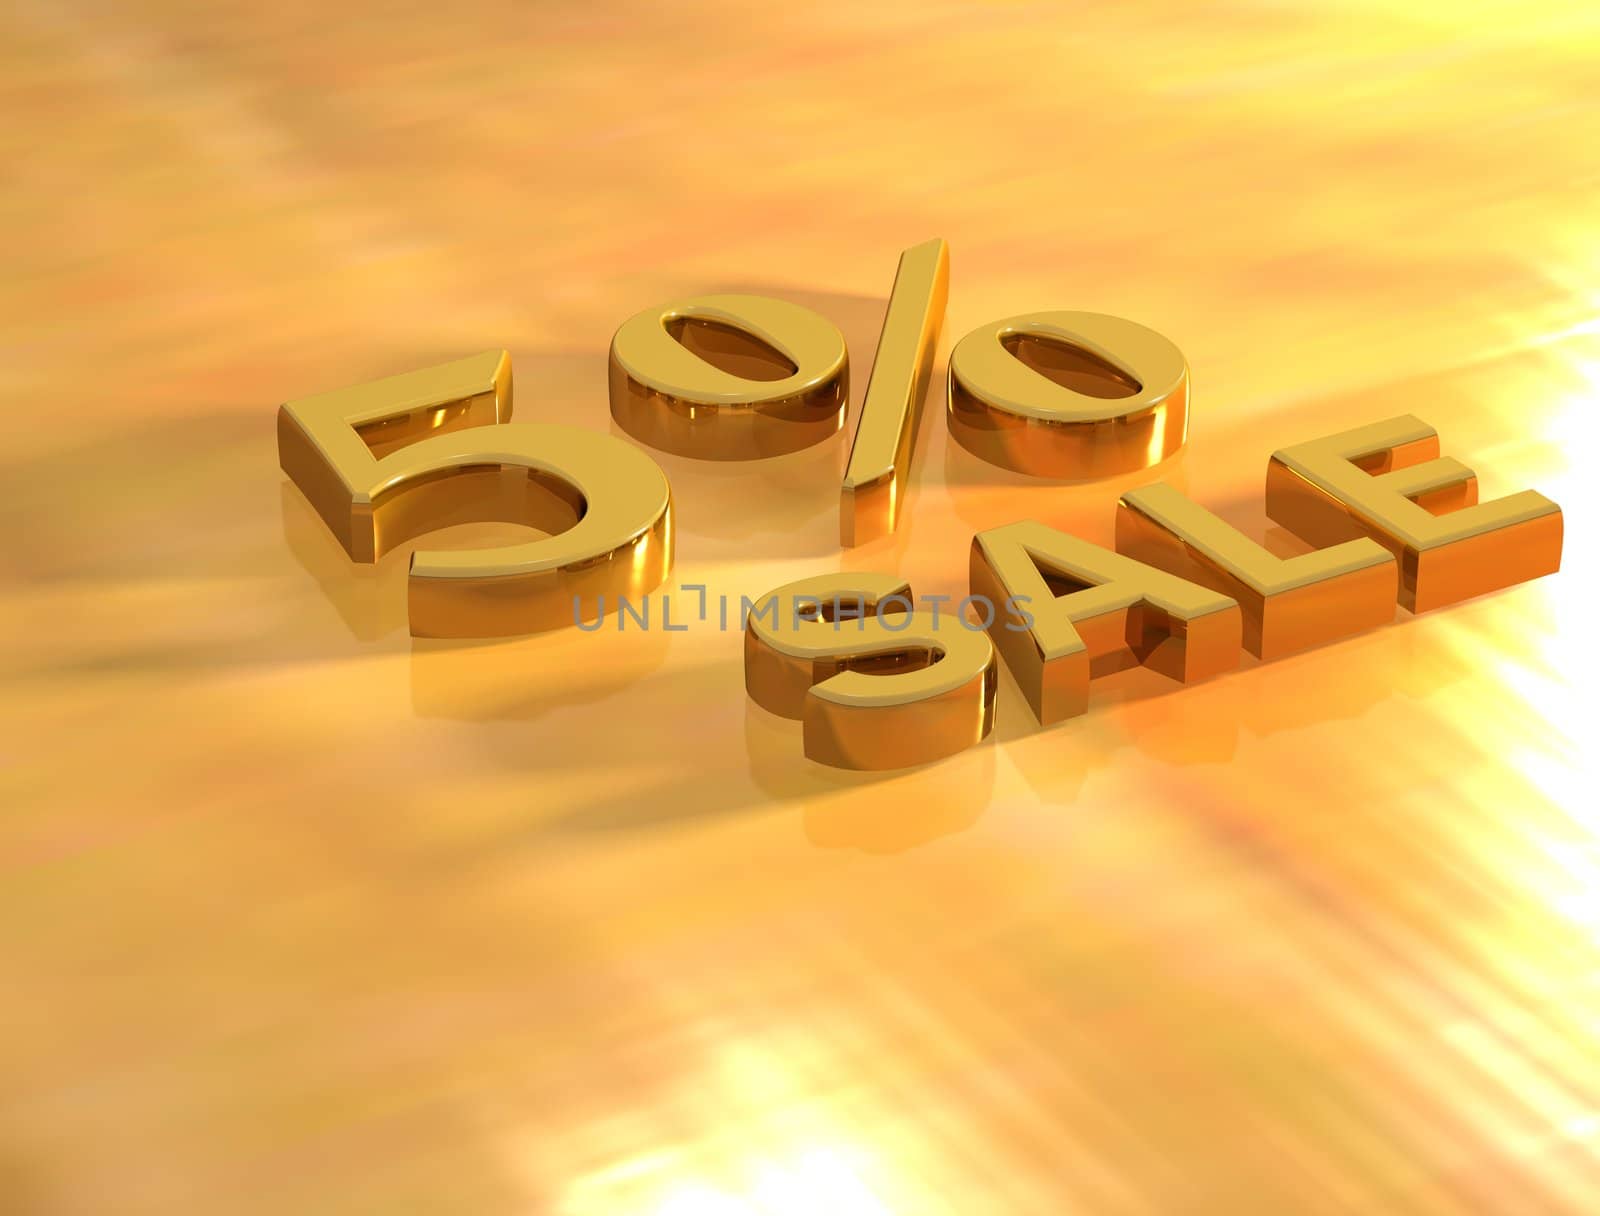 3D Sale gold text on gold background